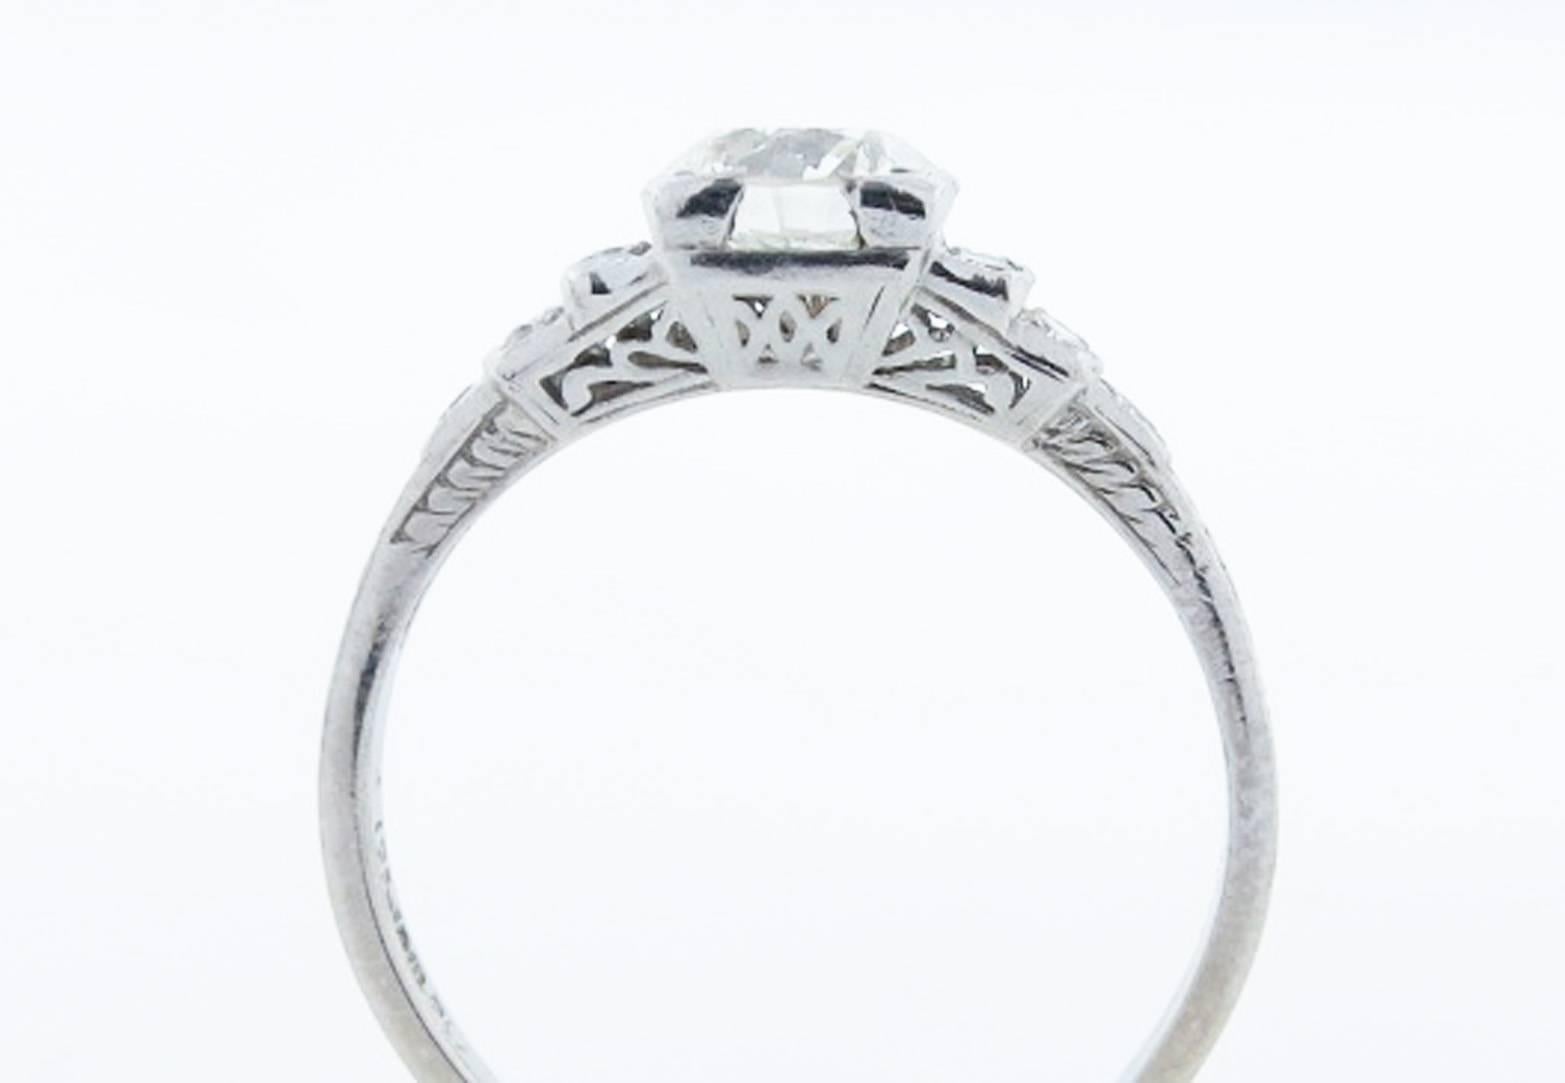 Handmade platinum mount antique diamond ring circa 1920. The center is box set with a round European cut diamond weighing approx .80cts. grading VS clarity J color. The lovely open work engraved mound is stepped down with 6 round European cut